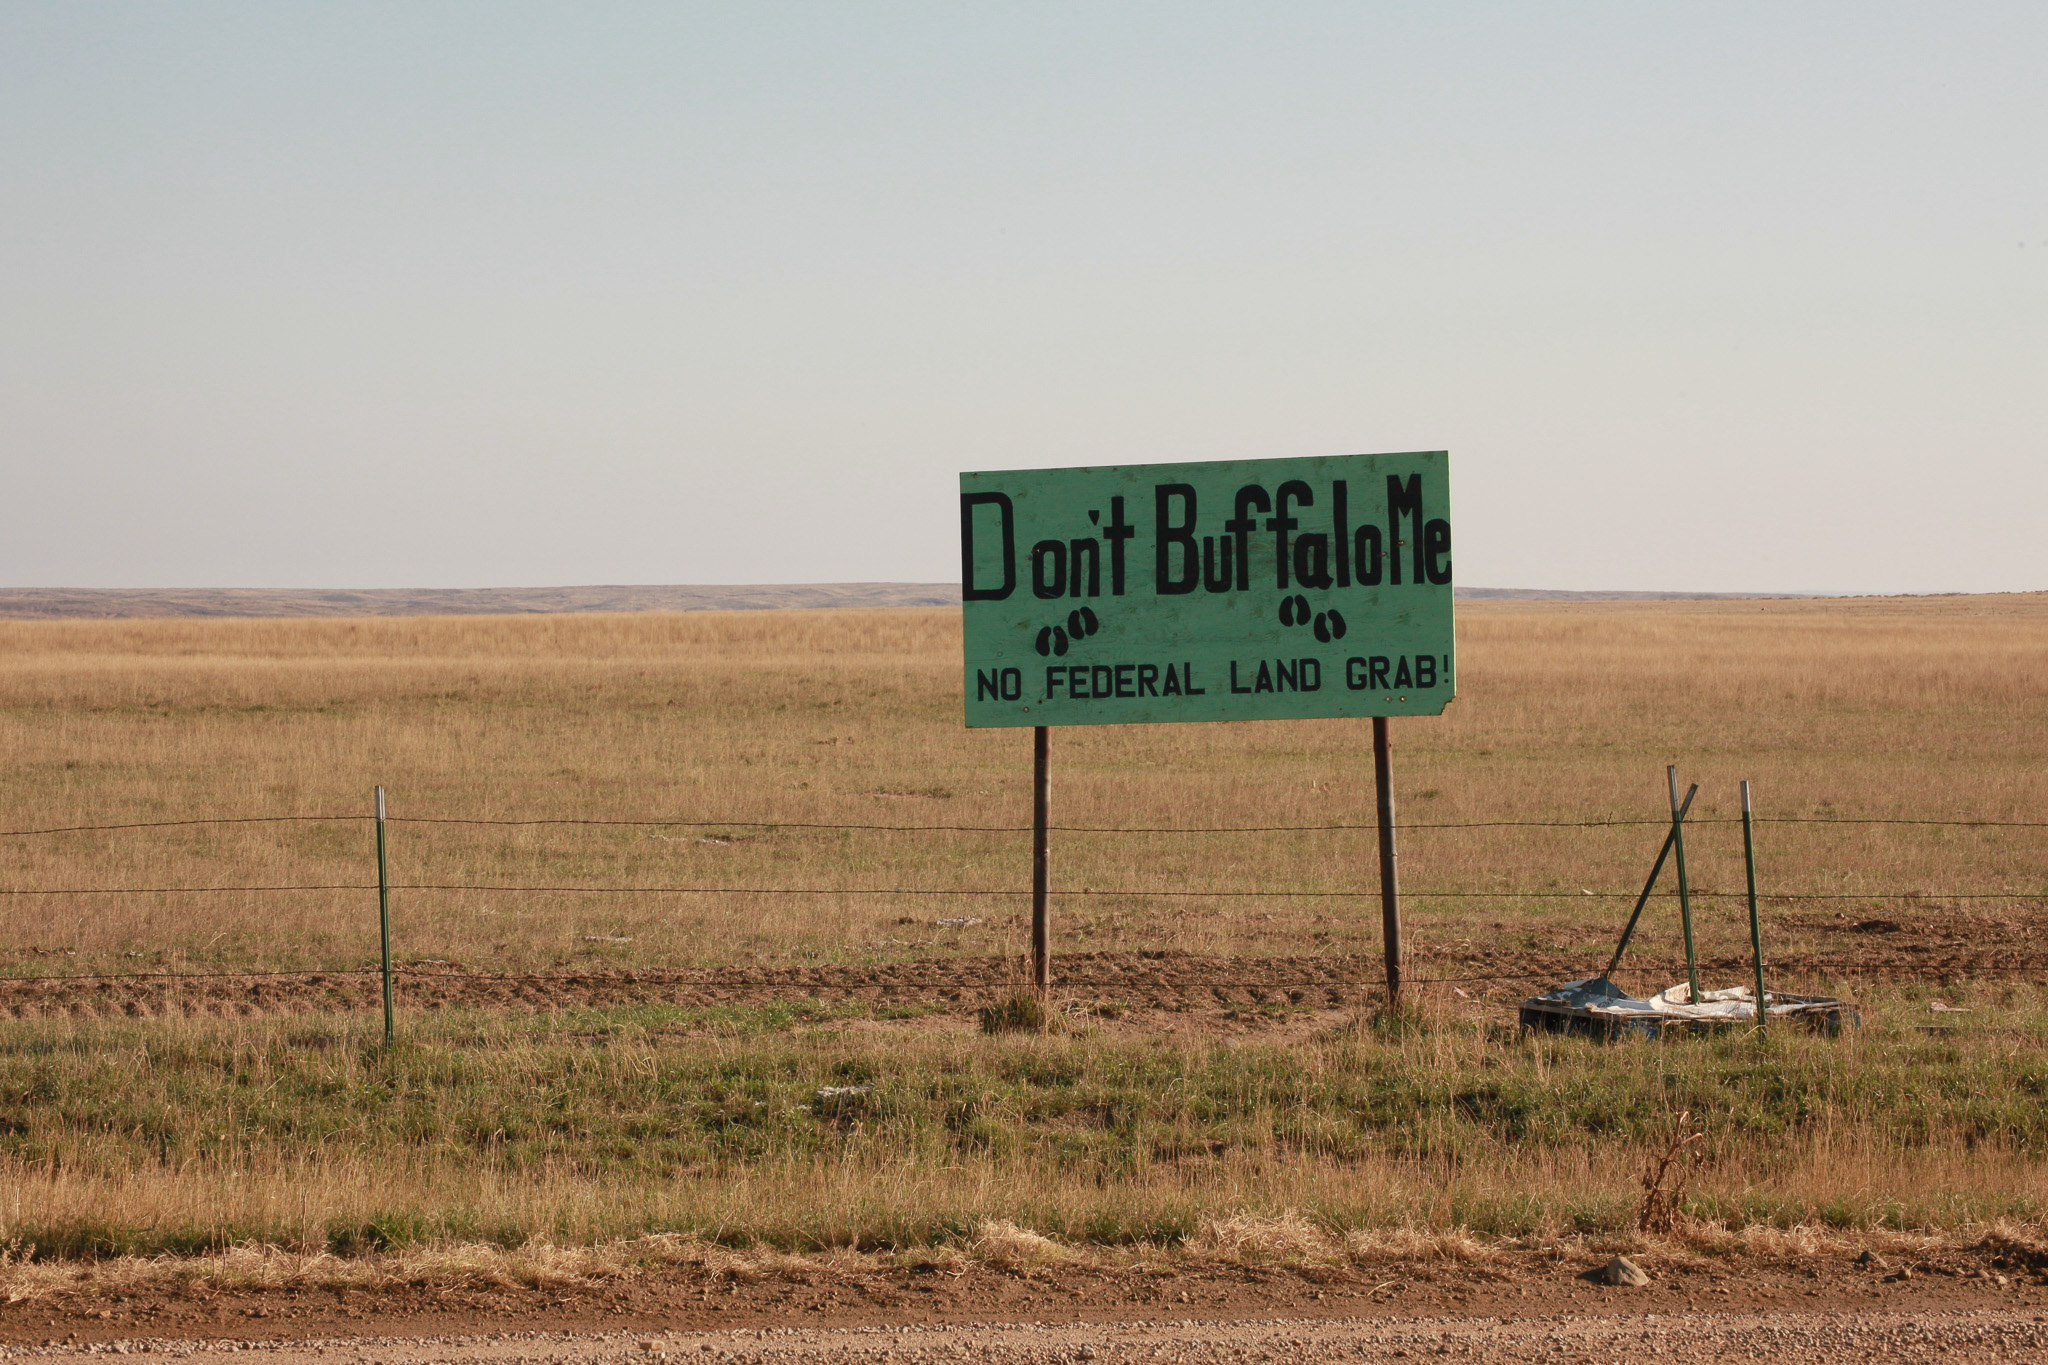 An anti-bison sign in Montana.